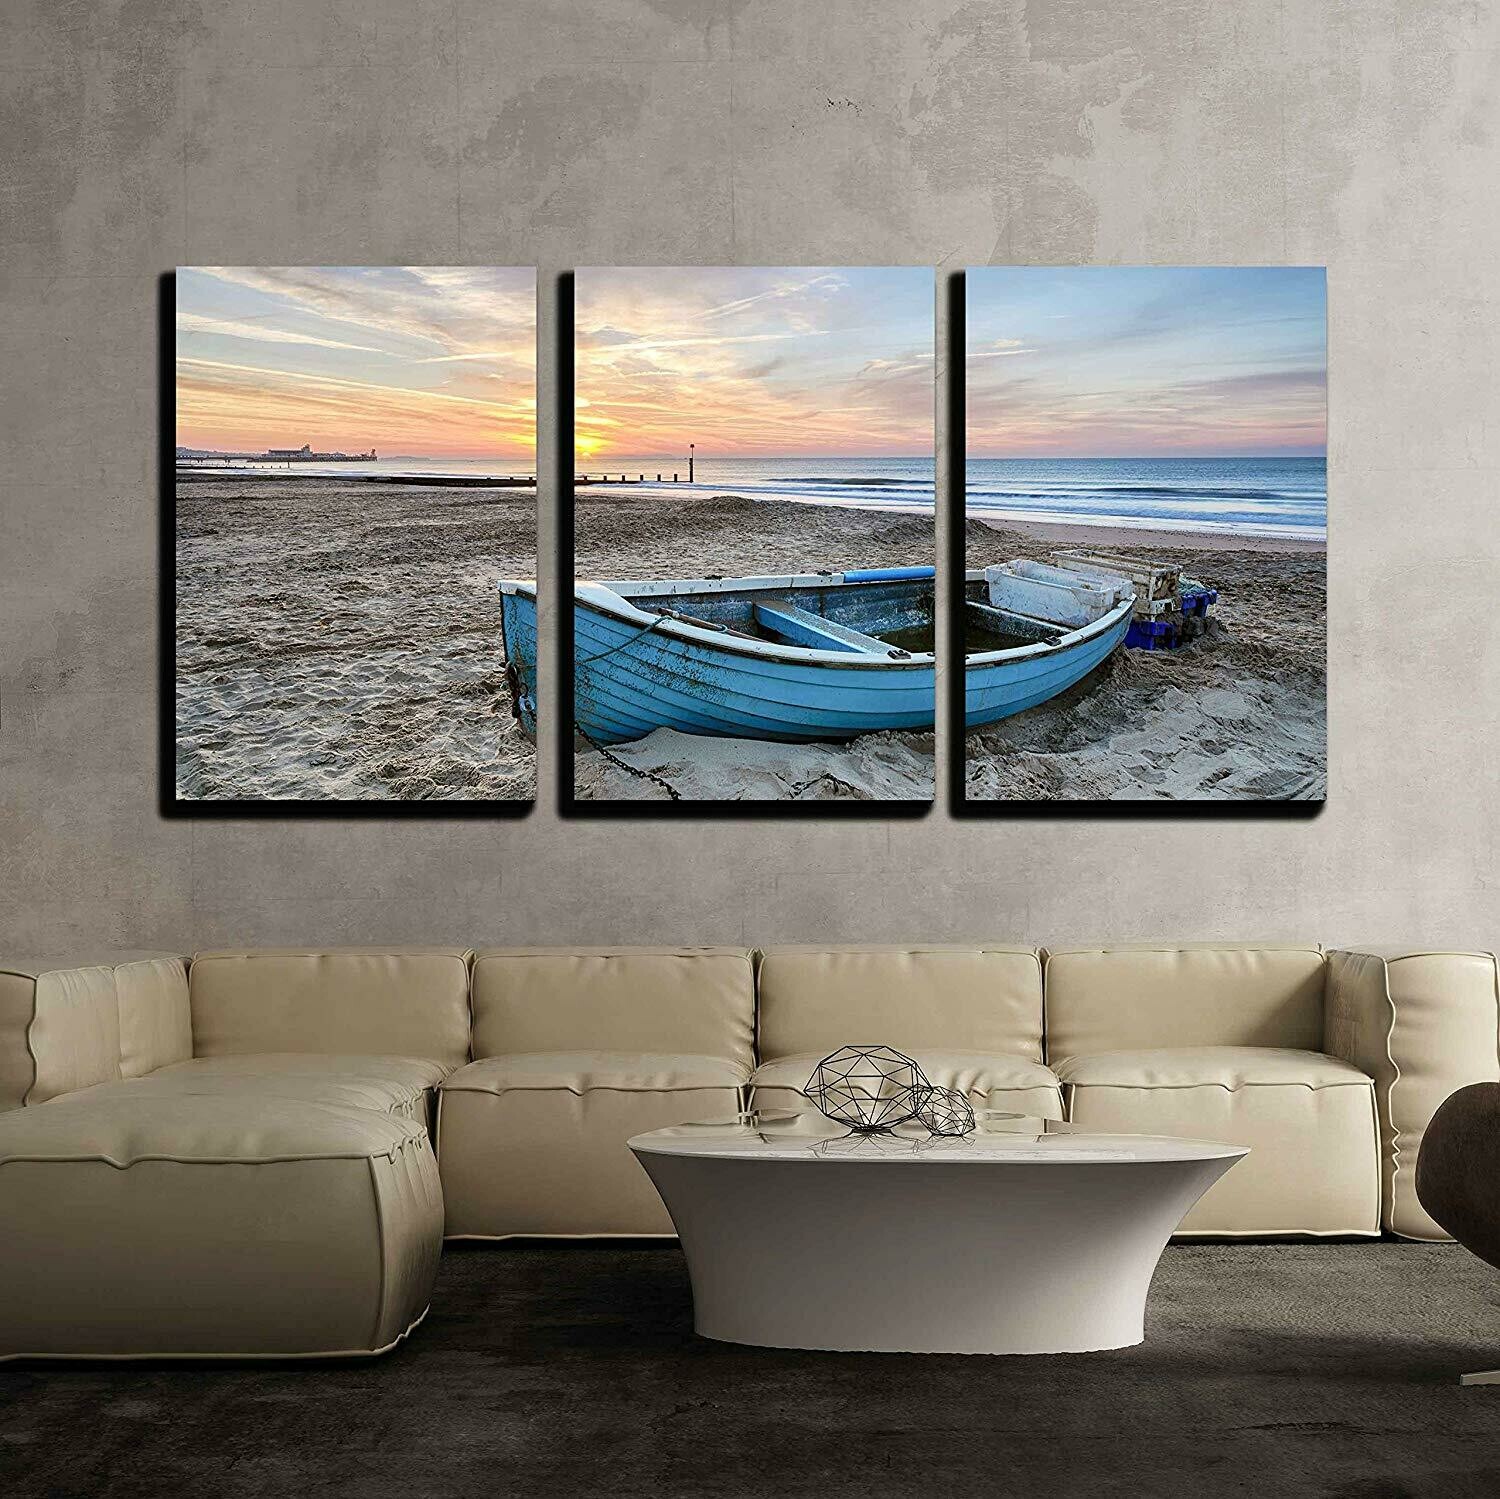 Wall26 - Turquoise Blue Fishing Boat at Sunrise on Bournemouth Beach with Pier in Far Distance - Canvas Art Wall Decor - 16&quot;x24&quot;x3 Panels